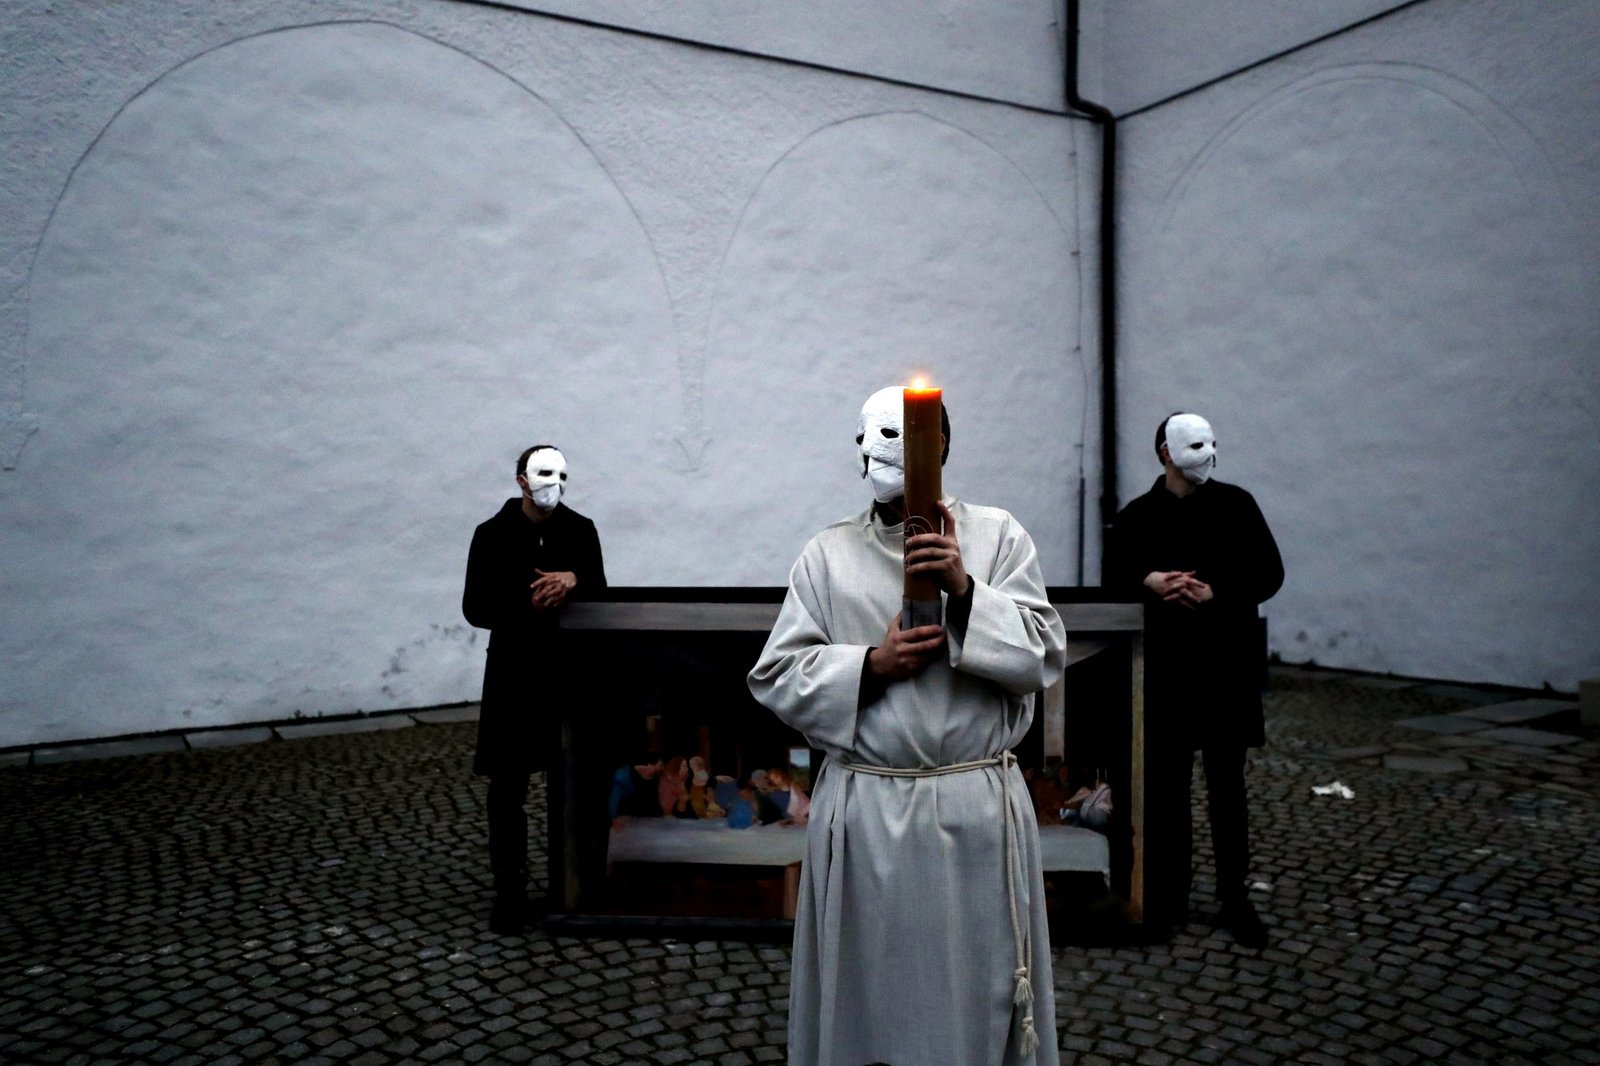 Easter procession has gone ahead in southern Czech Republic amid tight coronavirus restrictions